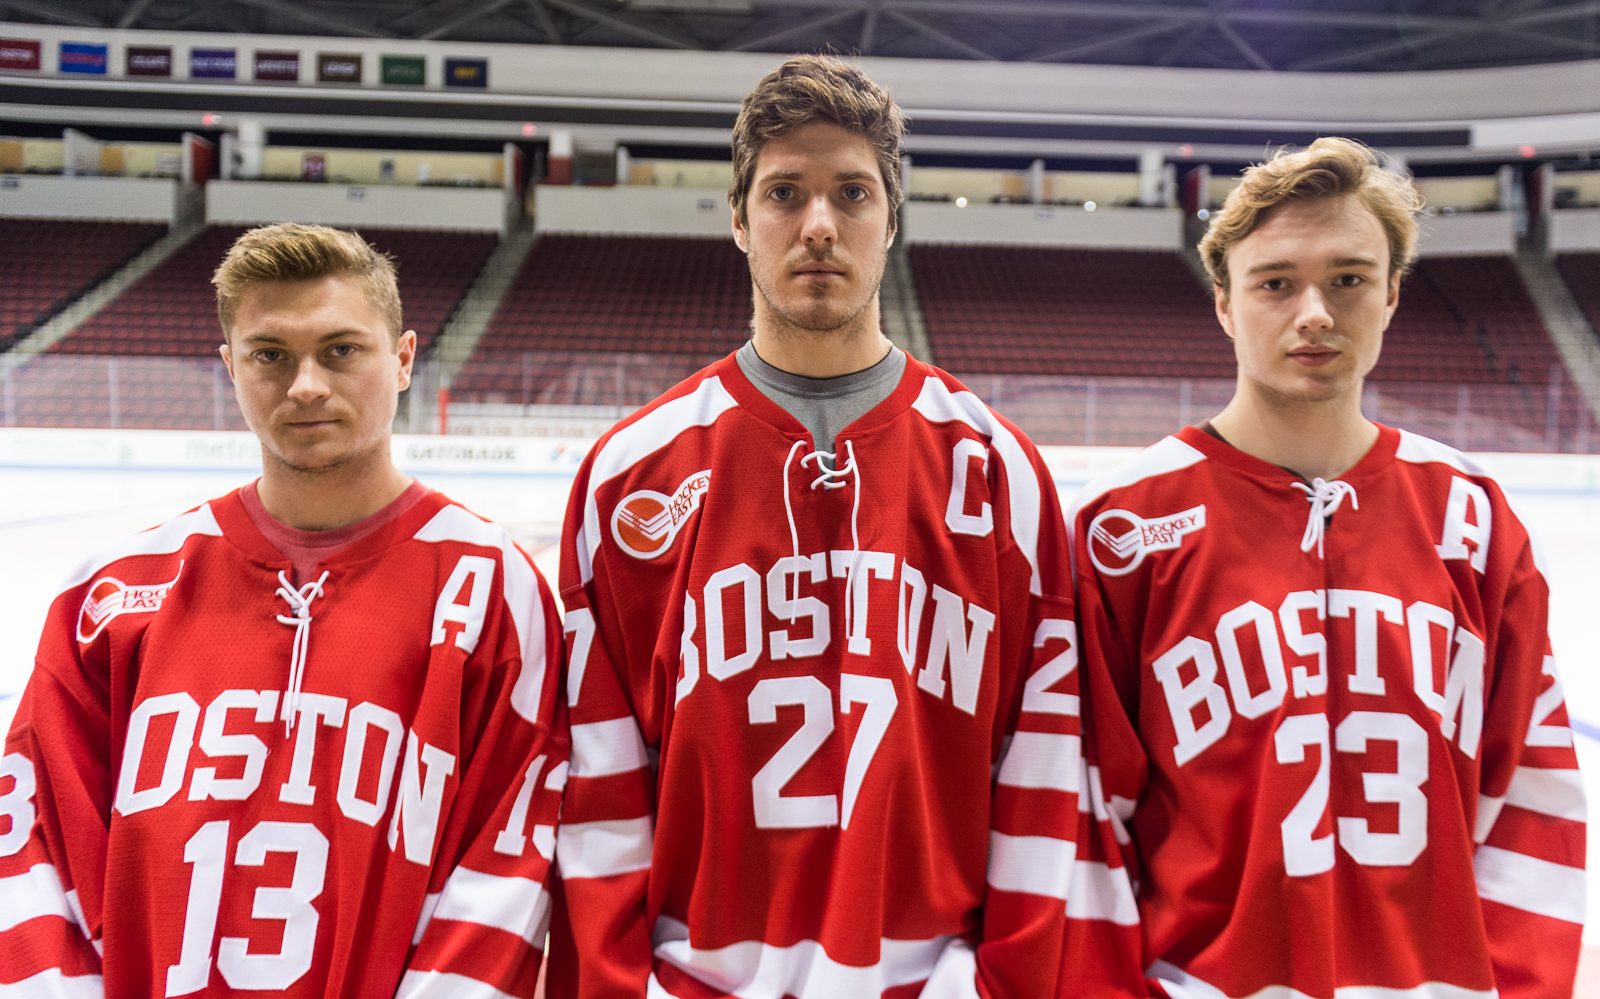 Nikolas Olsson, Doyle Somerby, and Jacob Forsbacka Karlsson captain the Terriers in 2016-17, looking to lead them to new heights. PHOTO BY MADDIE MALHOTRA/ DAILY FREE PRESS STAFF 